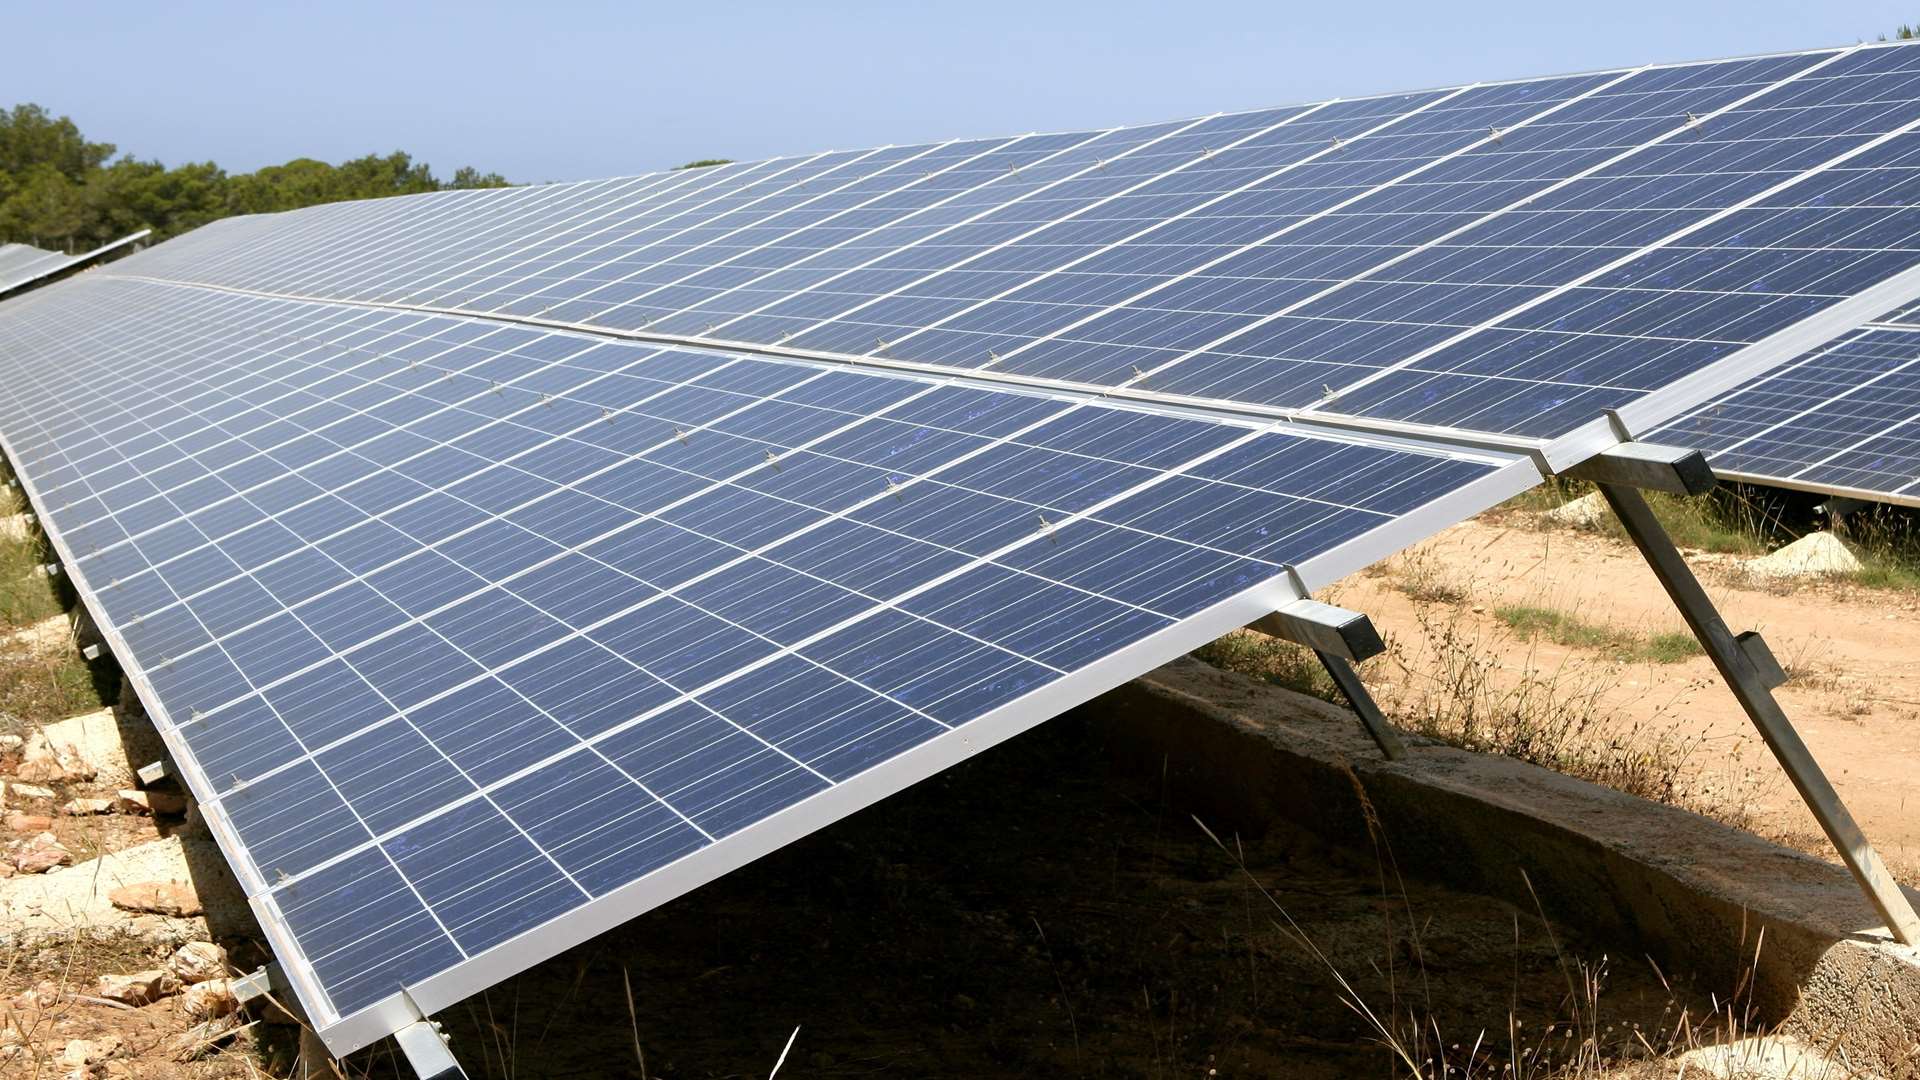 Solar panel firm PV Solar was fined after a worker was injured